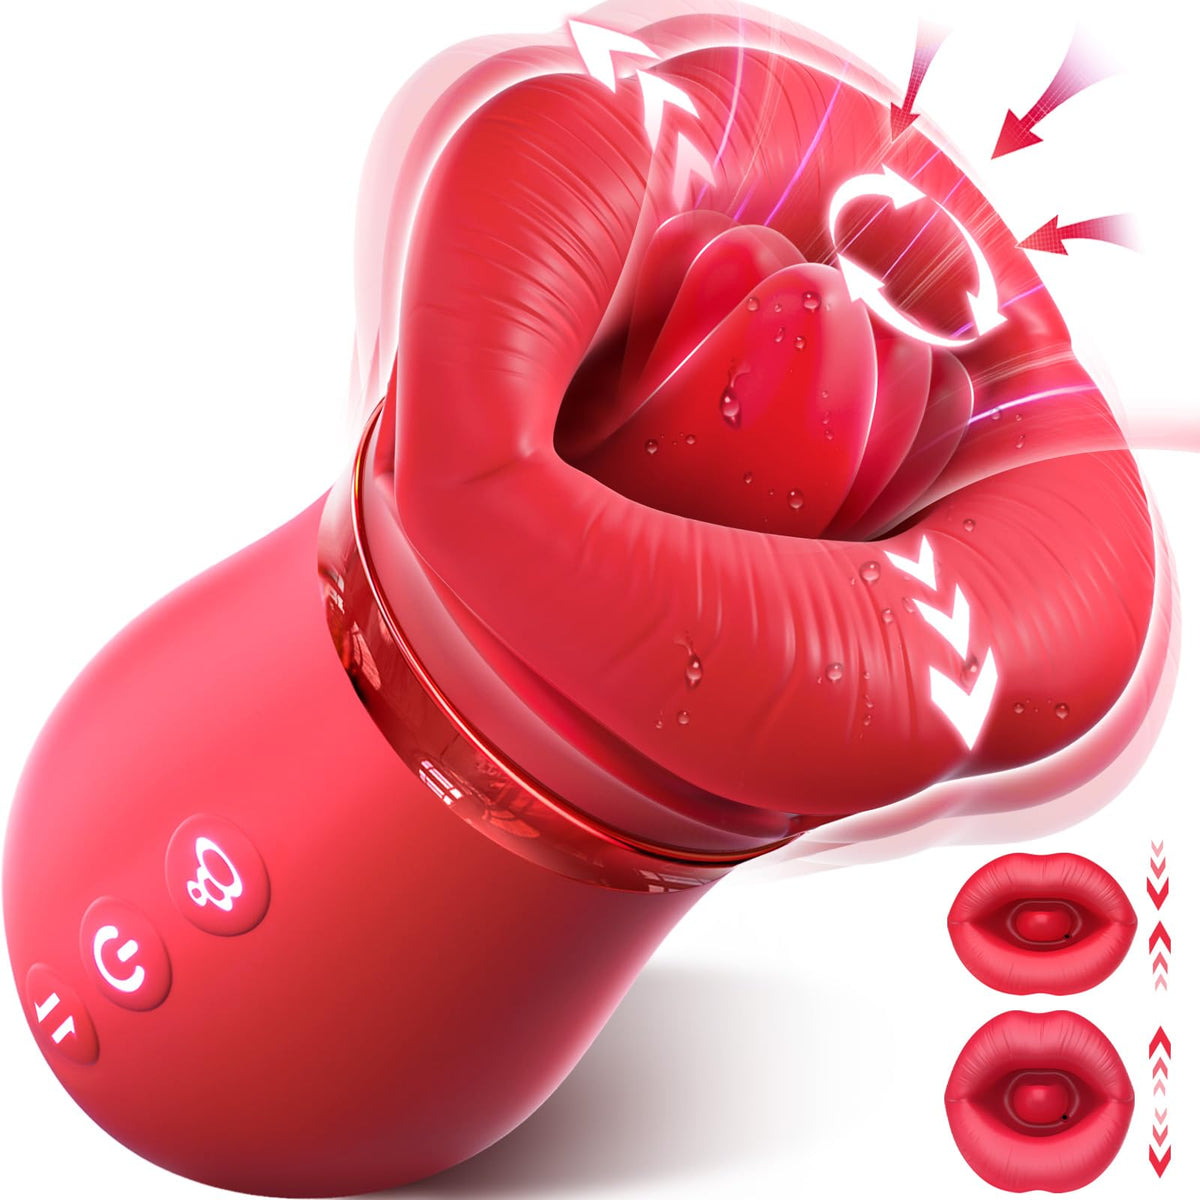 Lurevibe - 4IN1 Mouth Sucking Vibrator Rose Sex Toy - Lurevibe